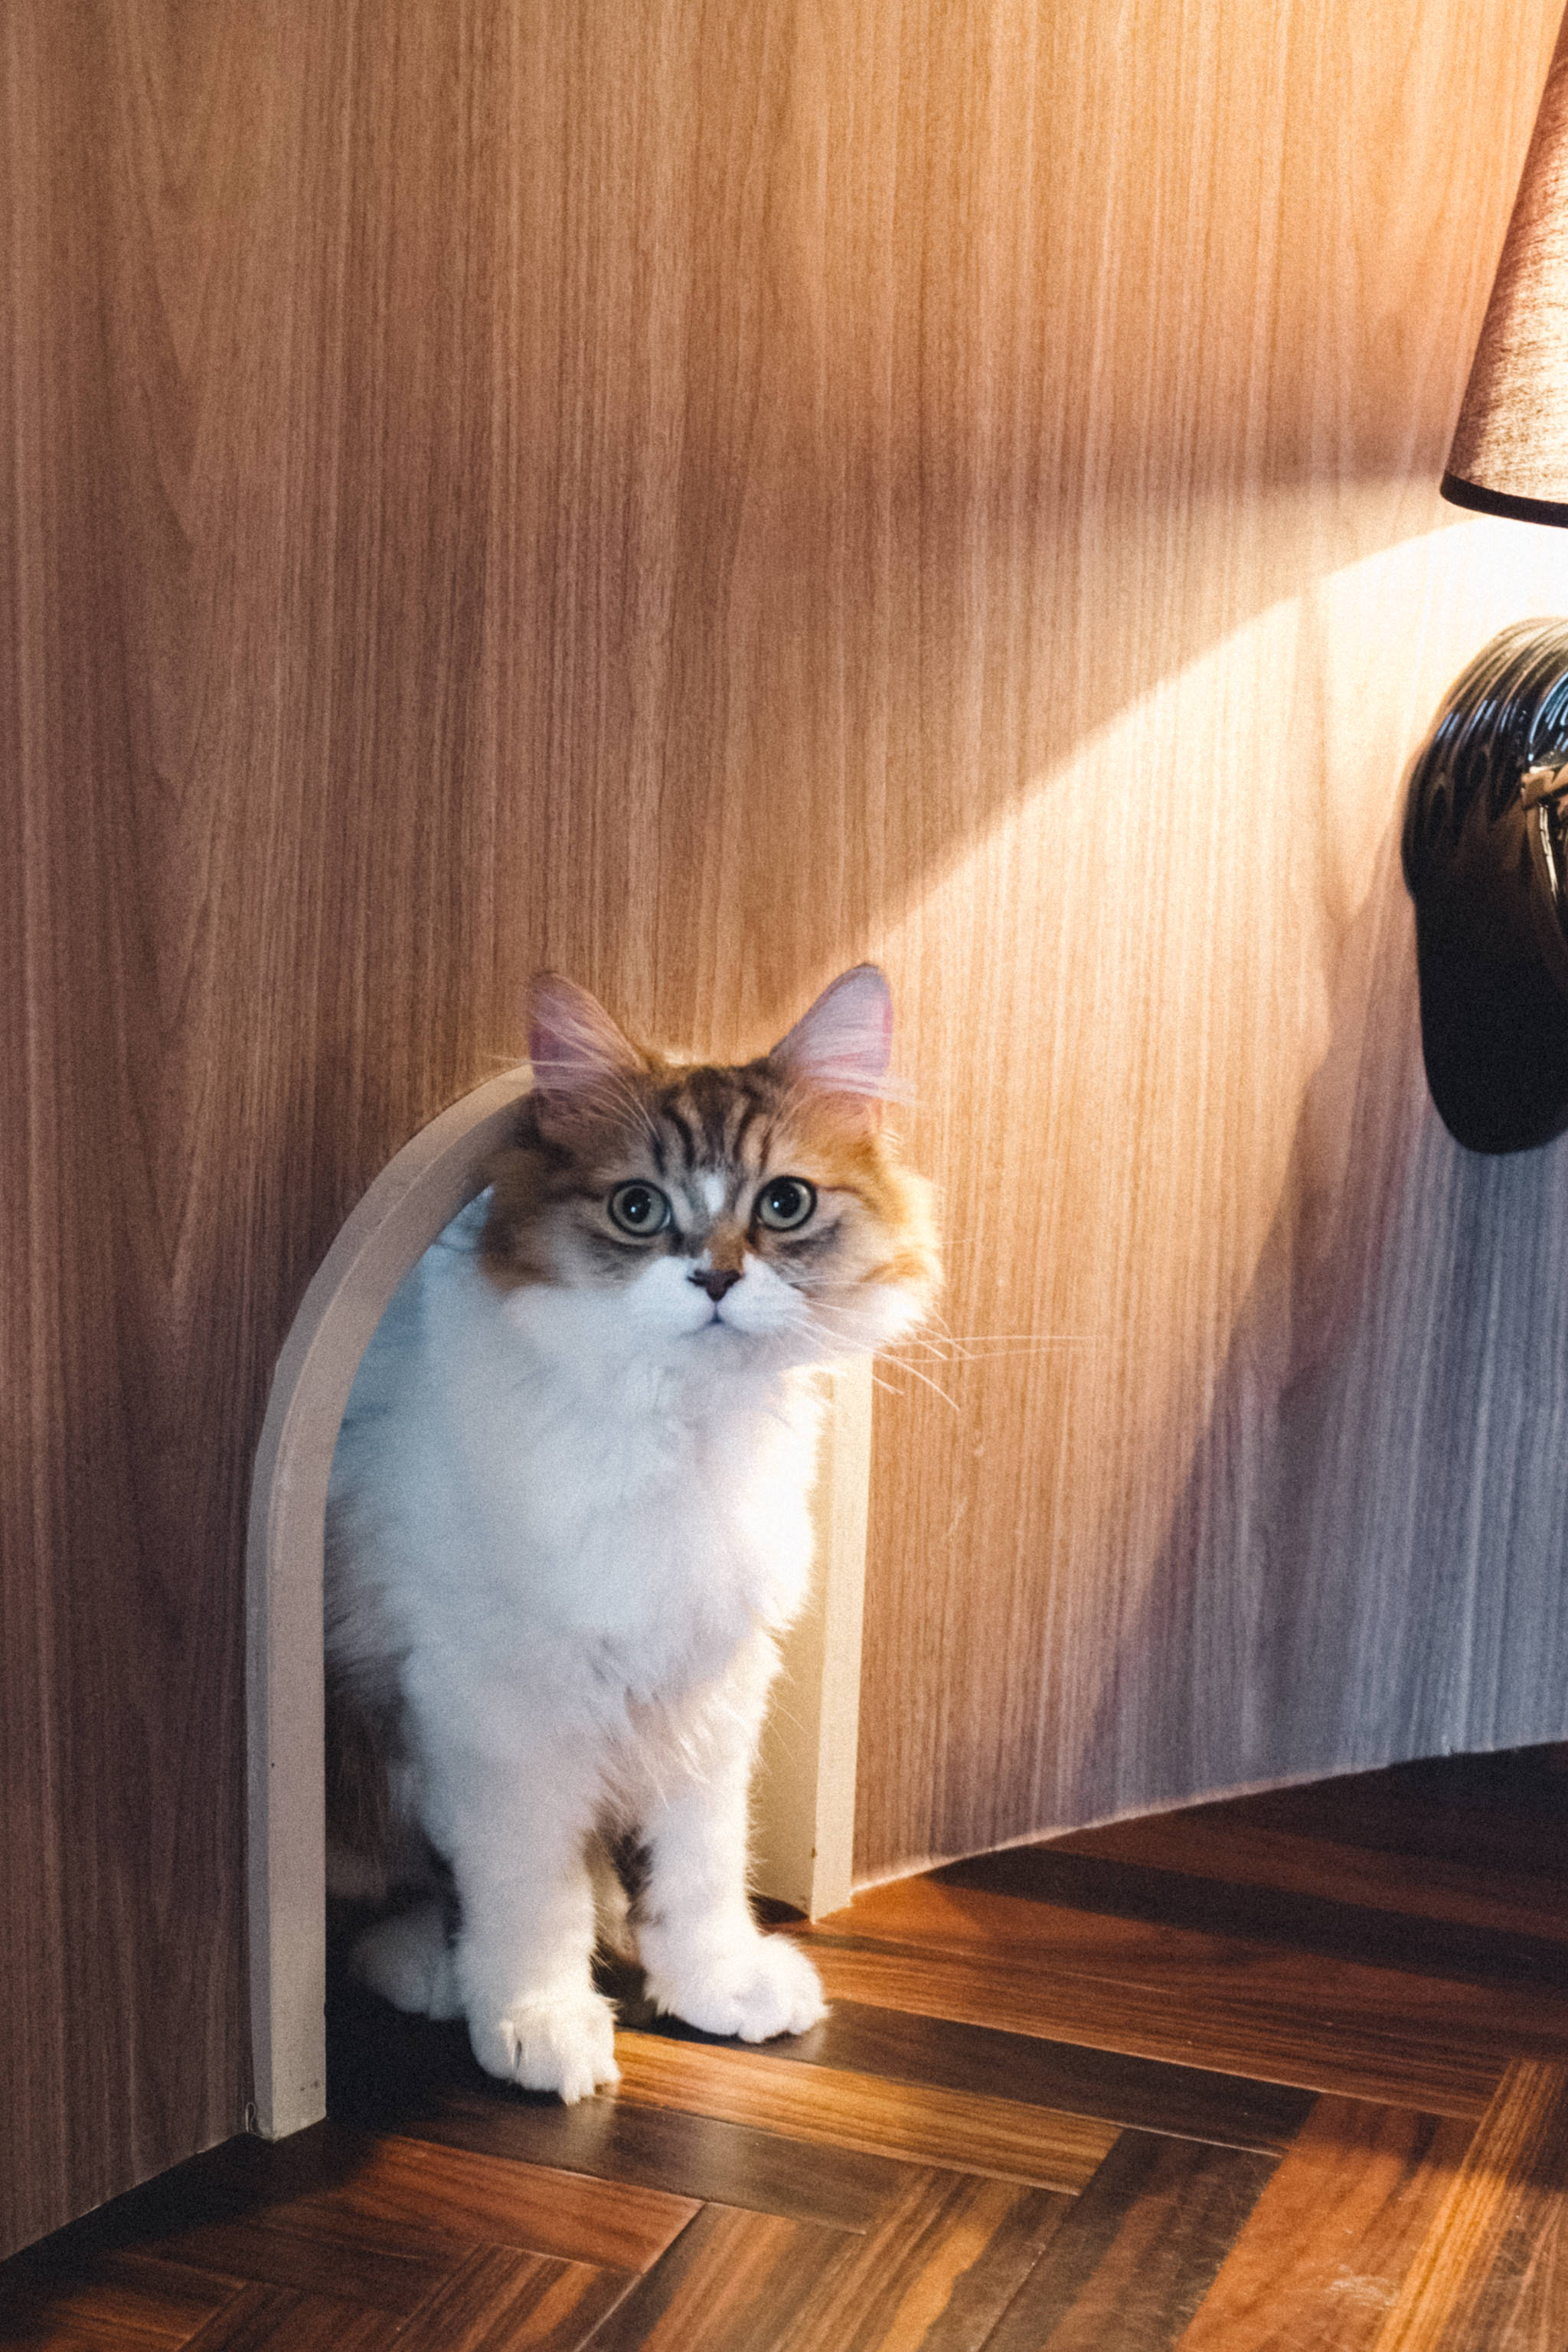 Scenes from a Tokyo Cat Cafe - She's So Bright, Cats, Kitties, Tokyo, Persian, Cute, Aww, Adorable, Animals, Kittens